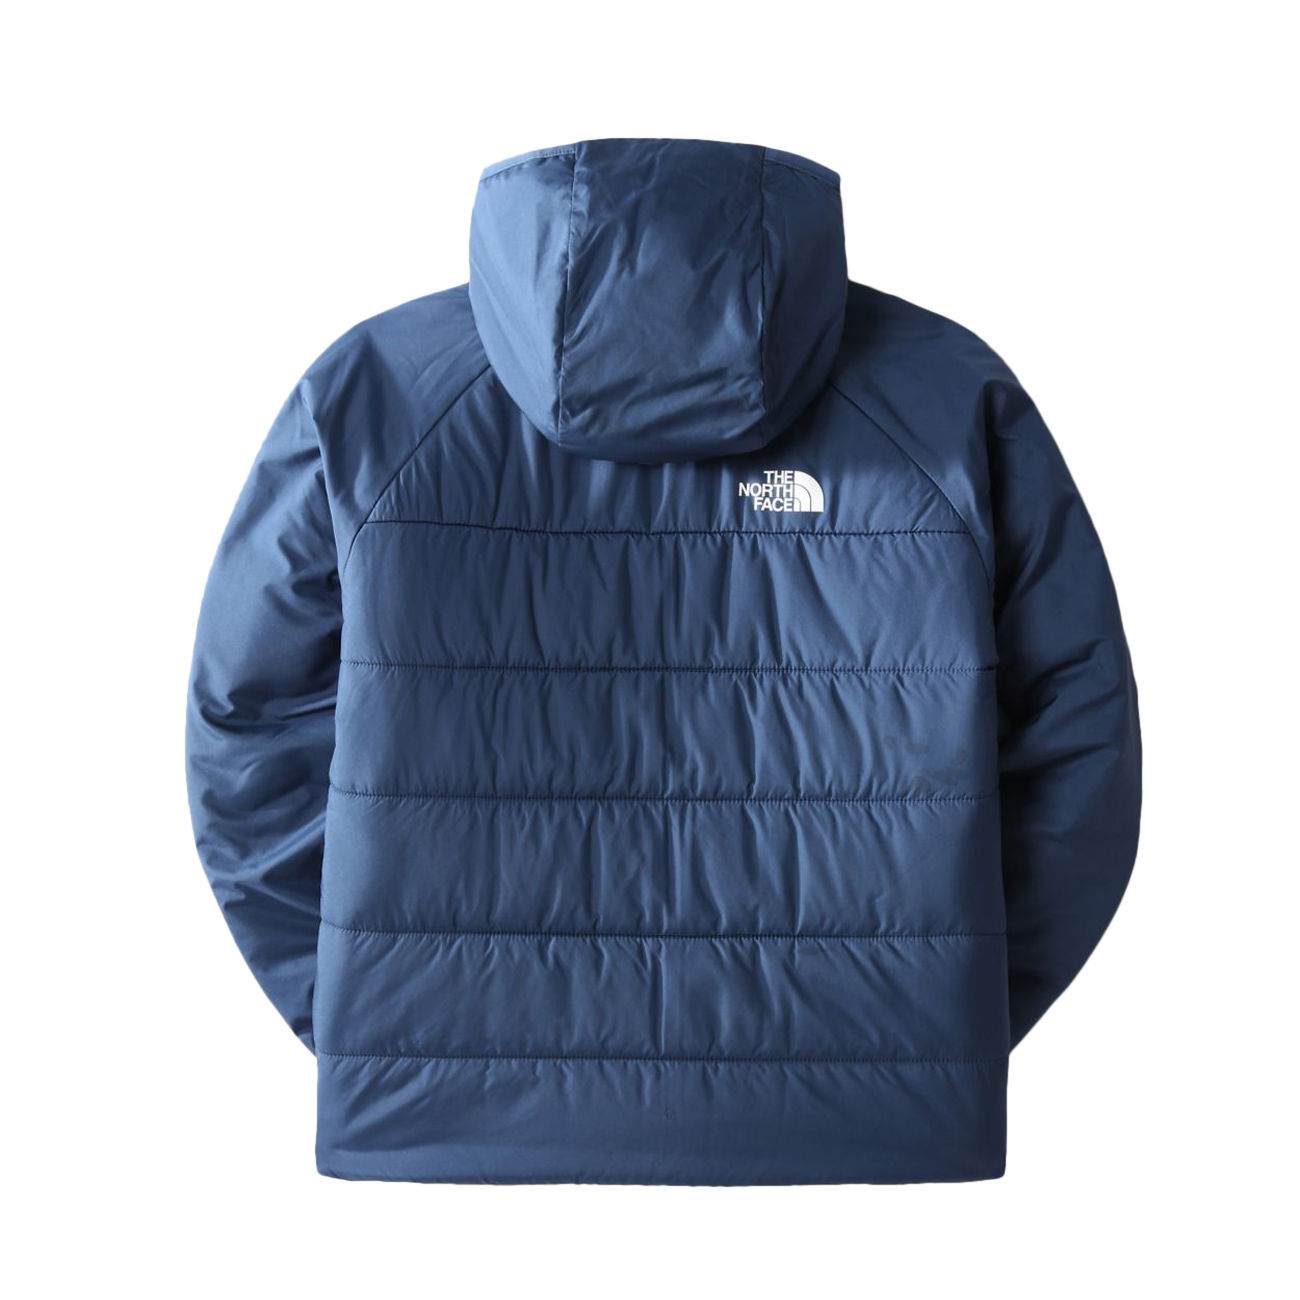 THE NORTH FACE JACKET REVERSIBLE Boy Shady Blue